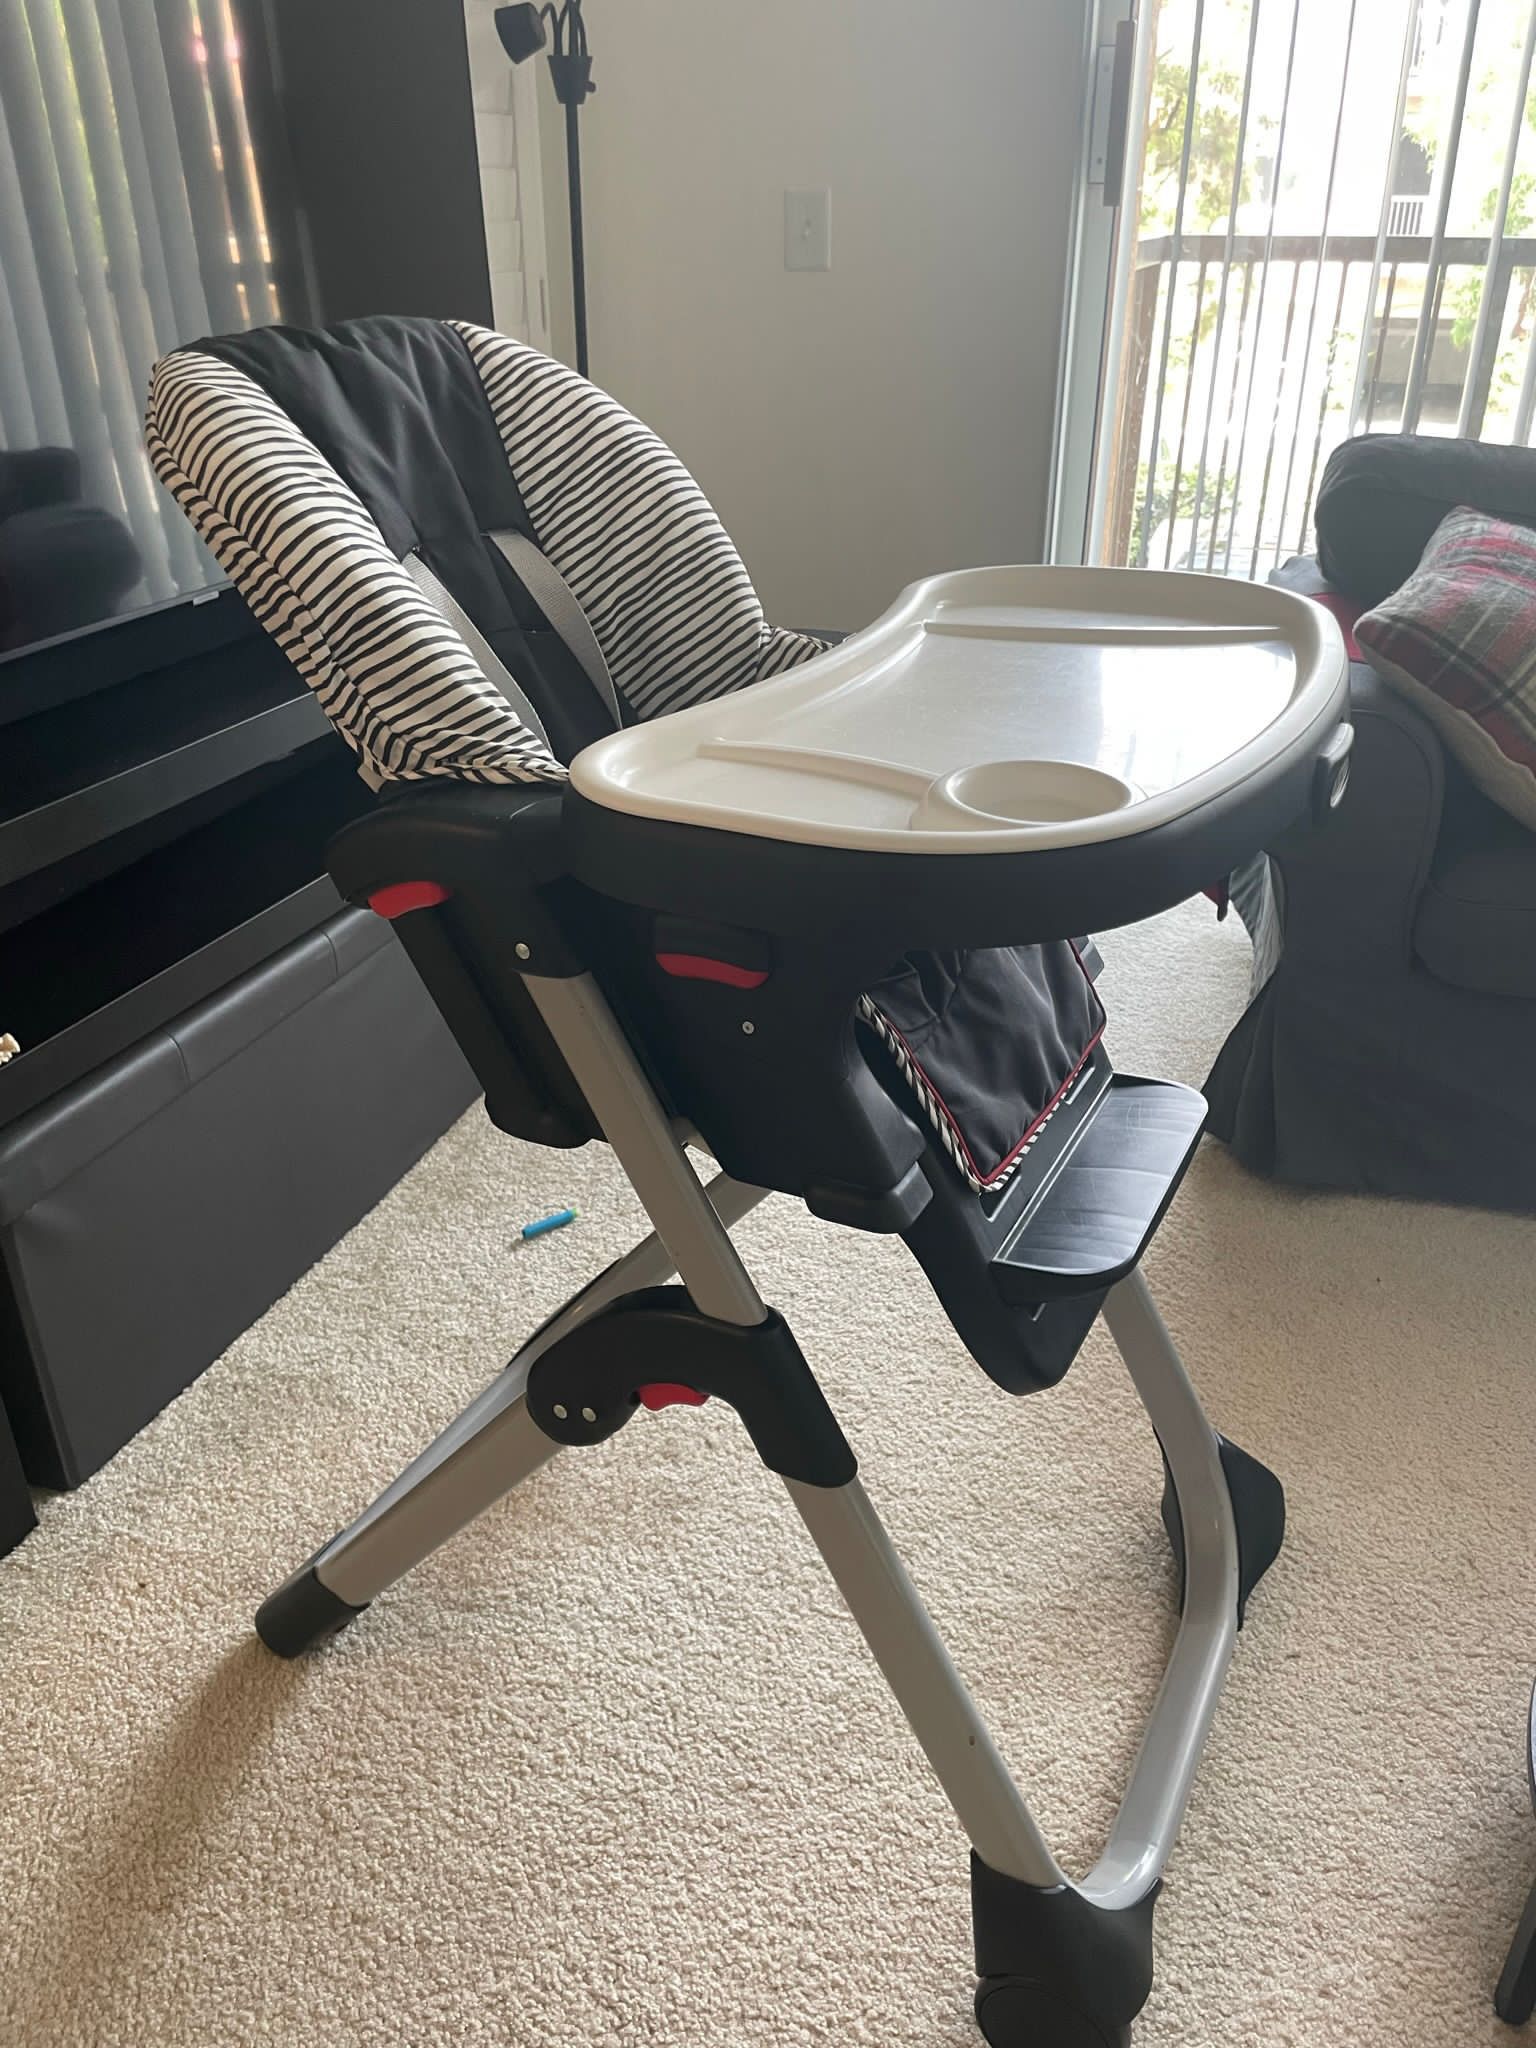 Adjustable High Chair,standard Changing Table and GARCO Crib